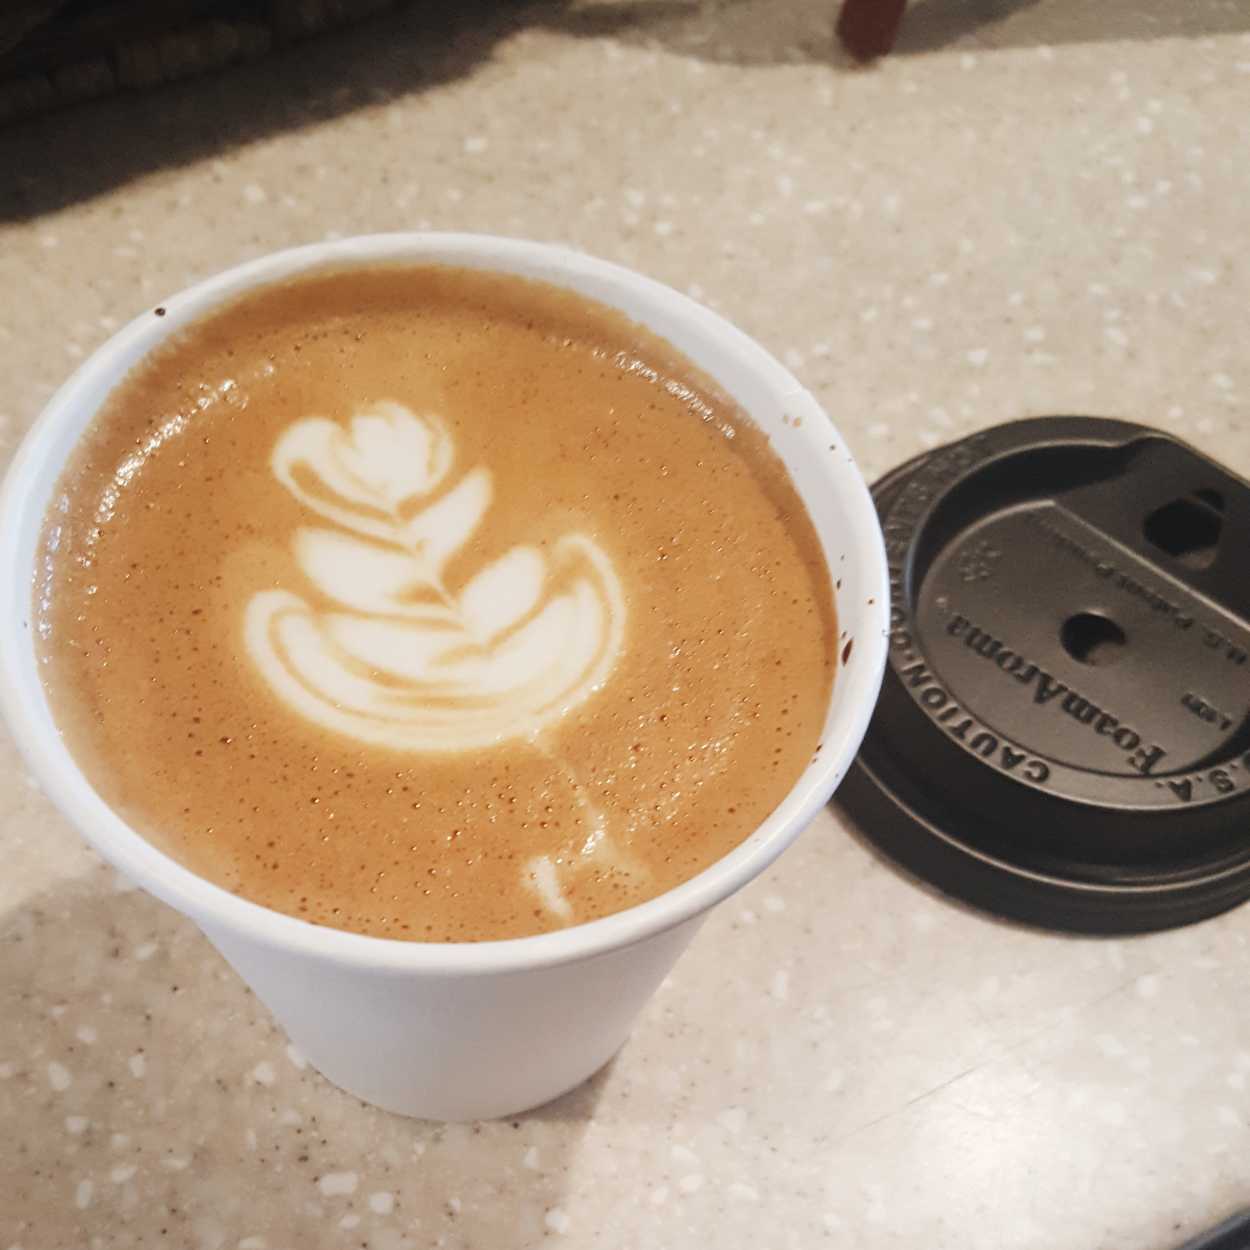 A cappuccino from Lucky Goat Coffee